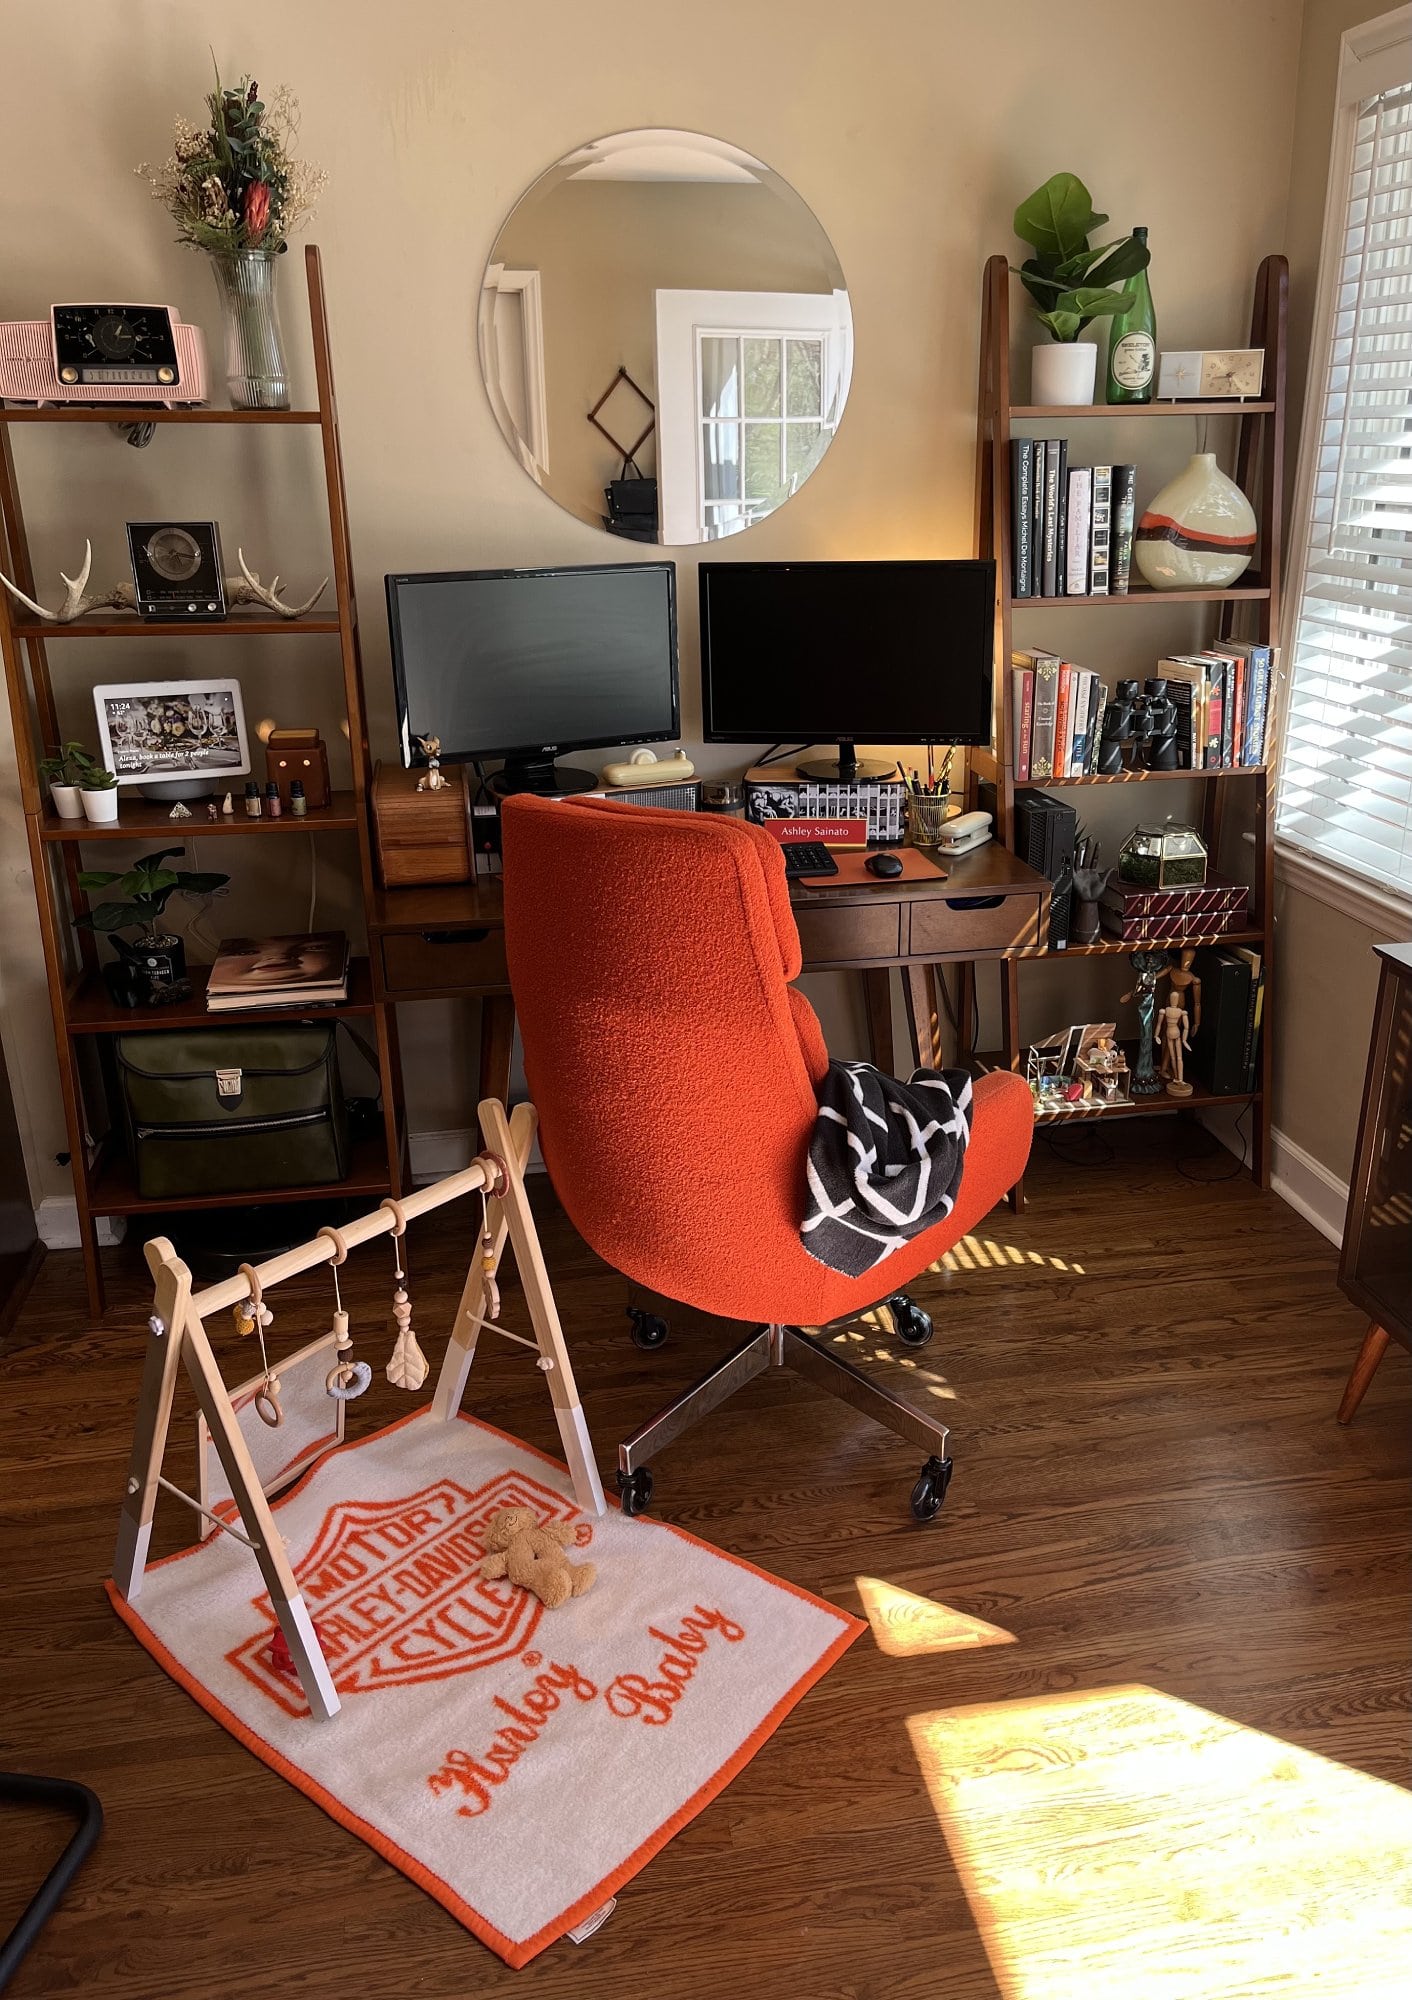 An orange Harley baby blanket next to the mid-century office chair of the same hue